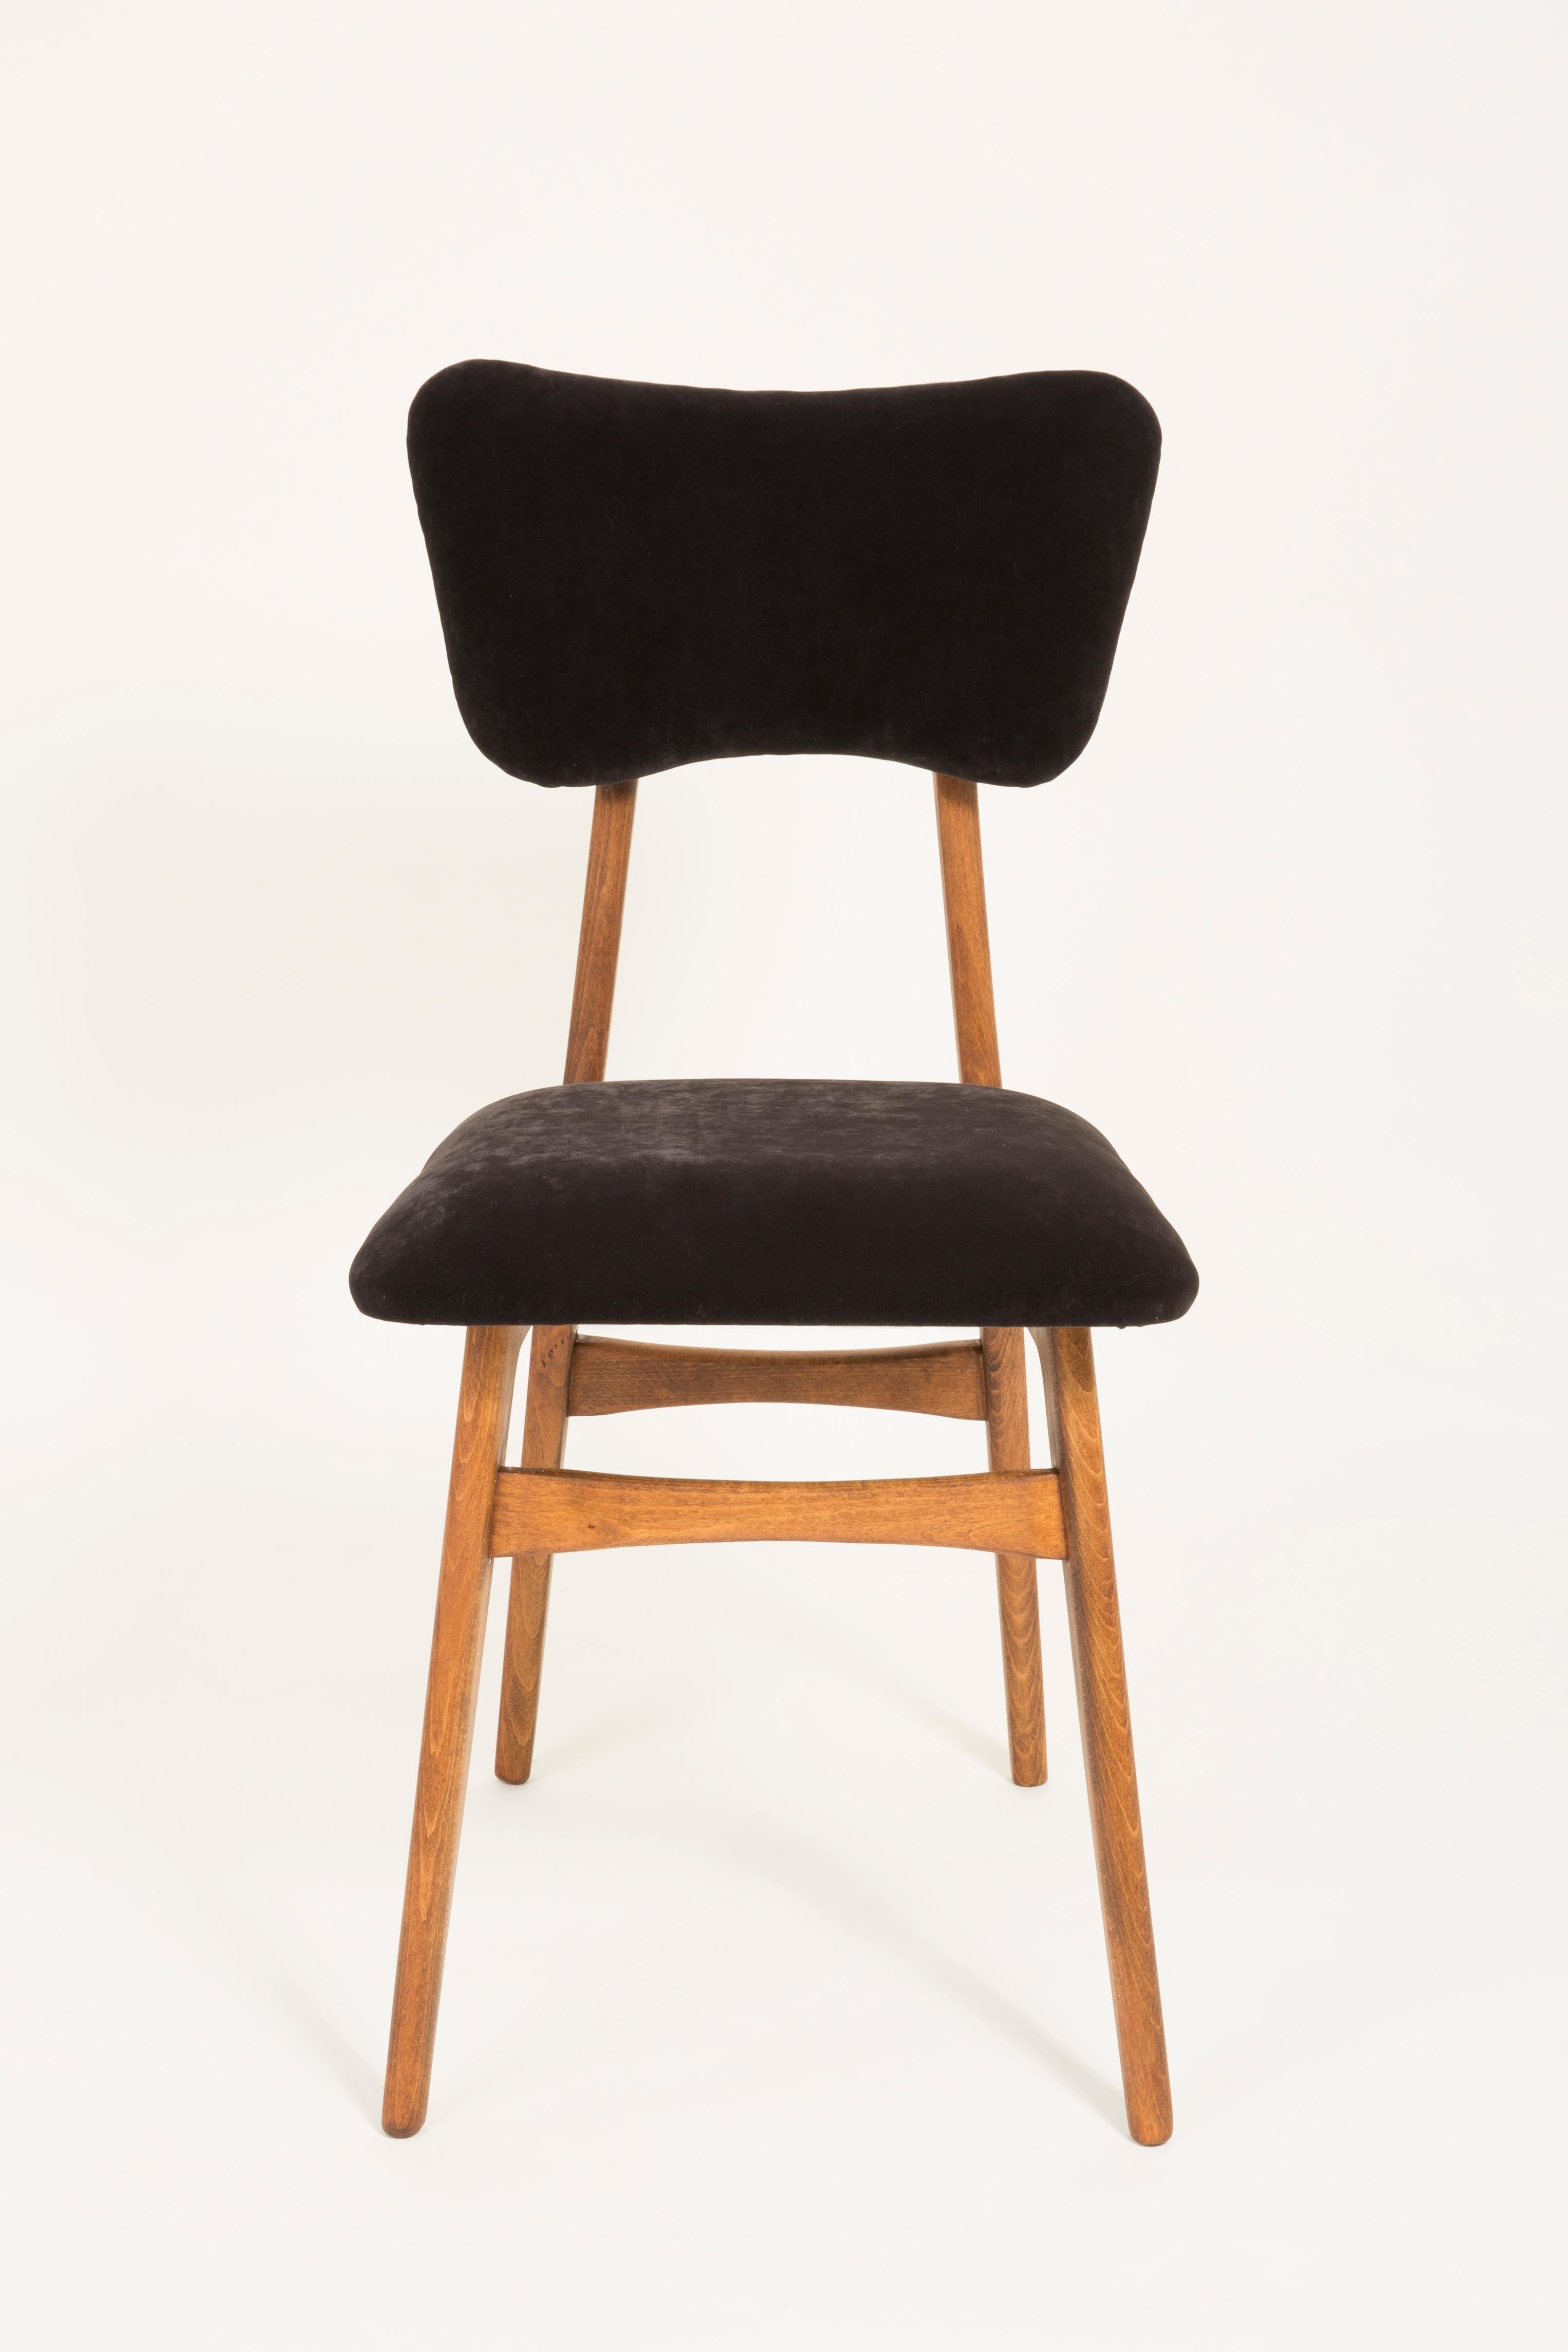 Set of Six 20th Century Black Velvet Chairs, Europe, 1960s For Sale 9